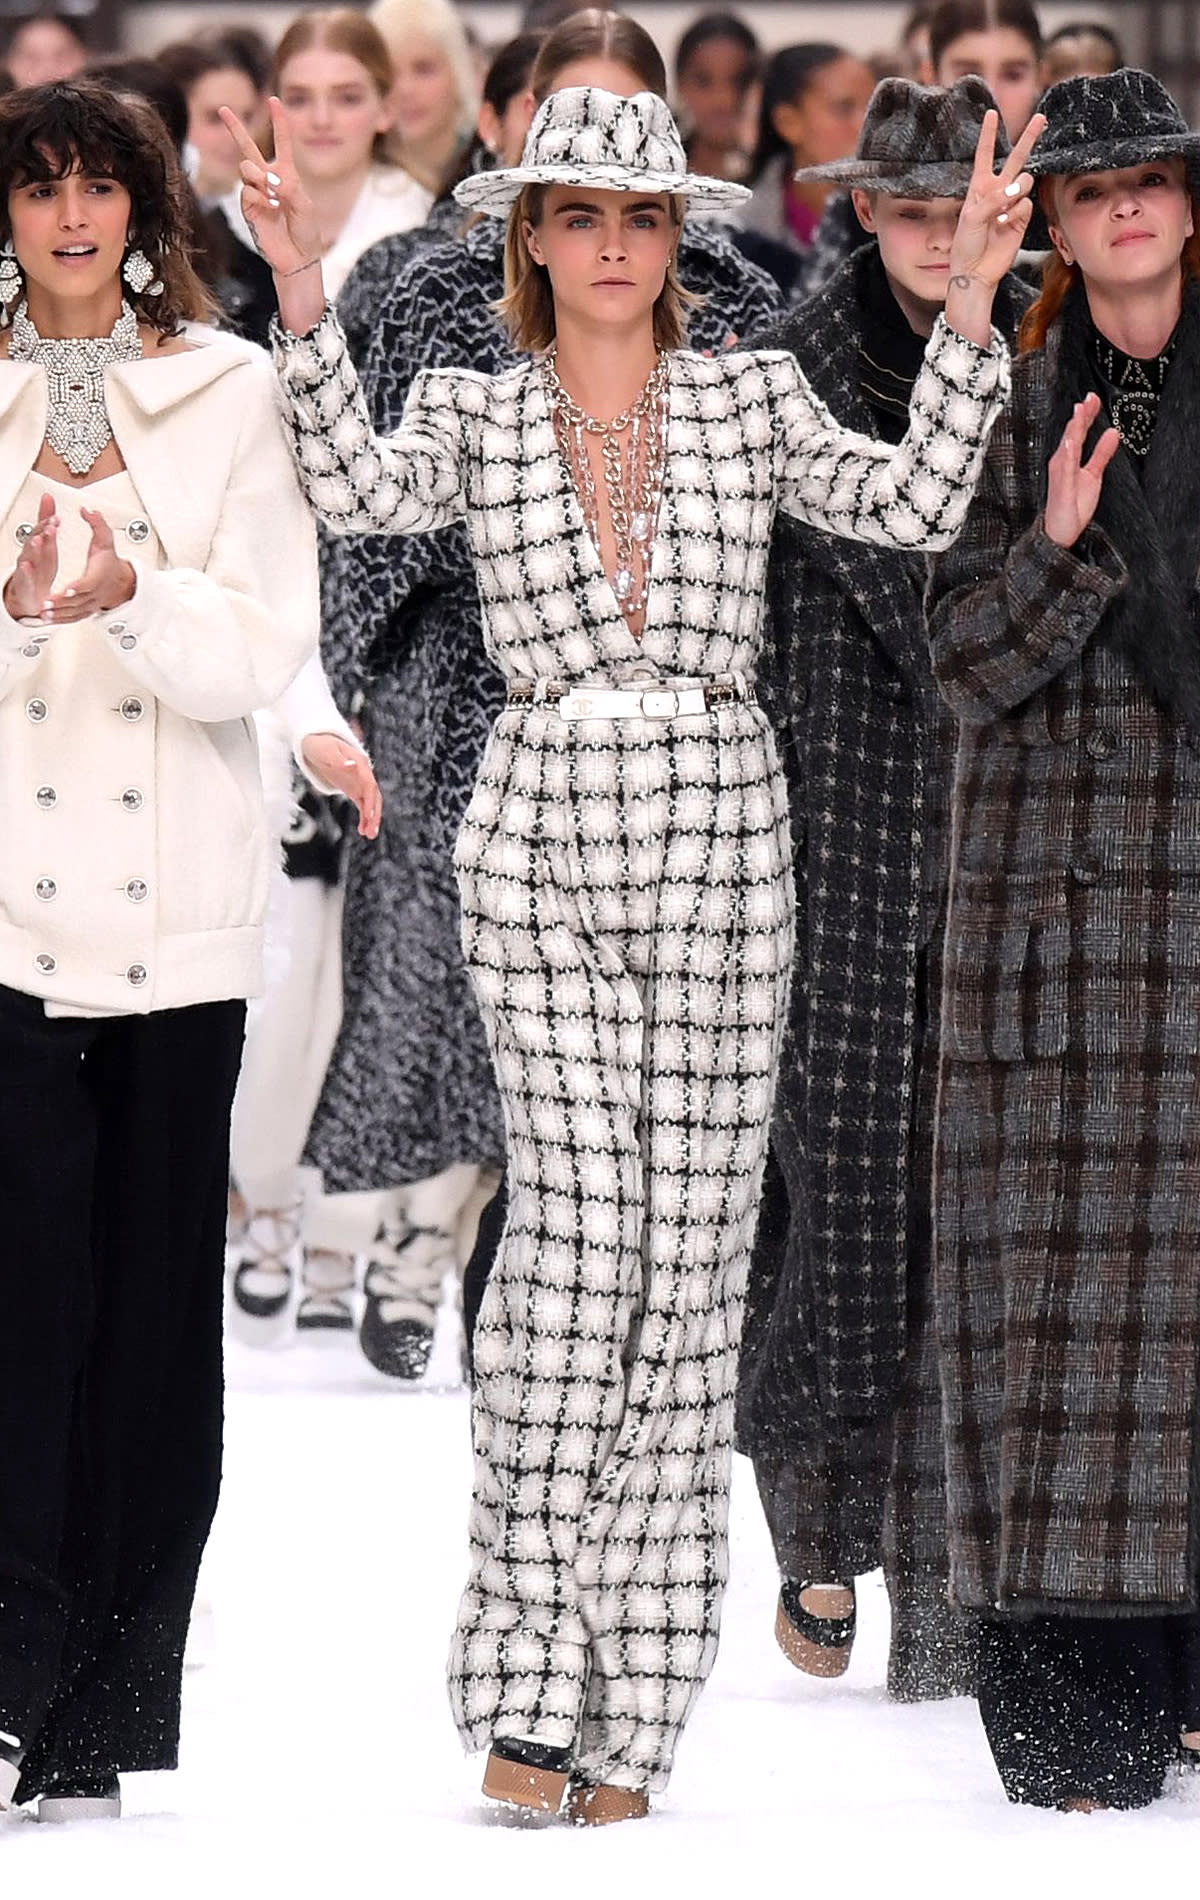 The Beauty Look for Karl Lagerfeld's Final Runway Show Was Classic Chanel -  Fashionista